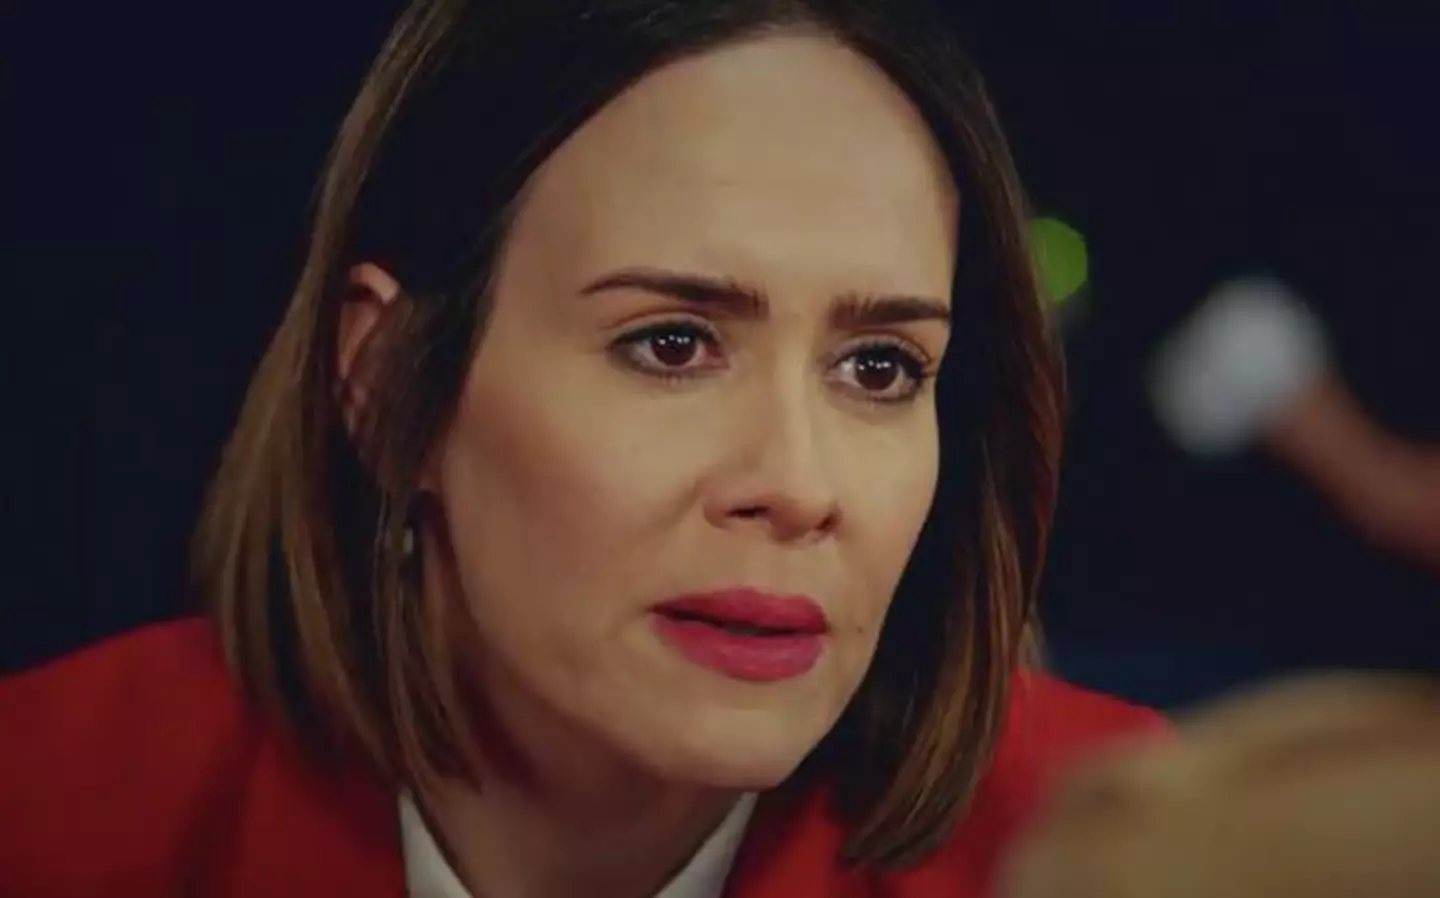 People think the actor could be related to Sarah Paulson.